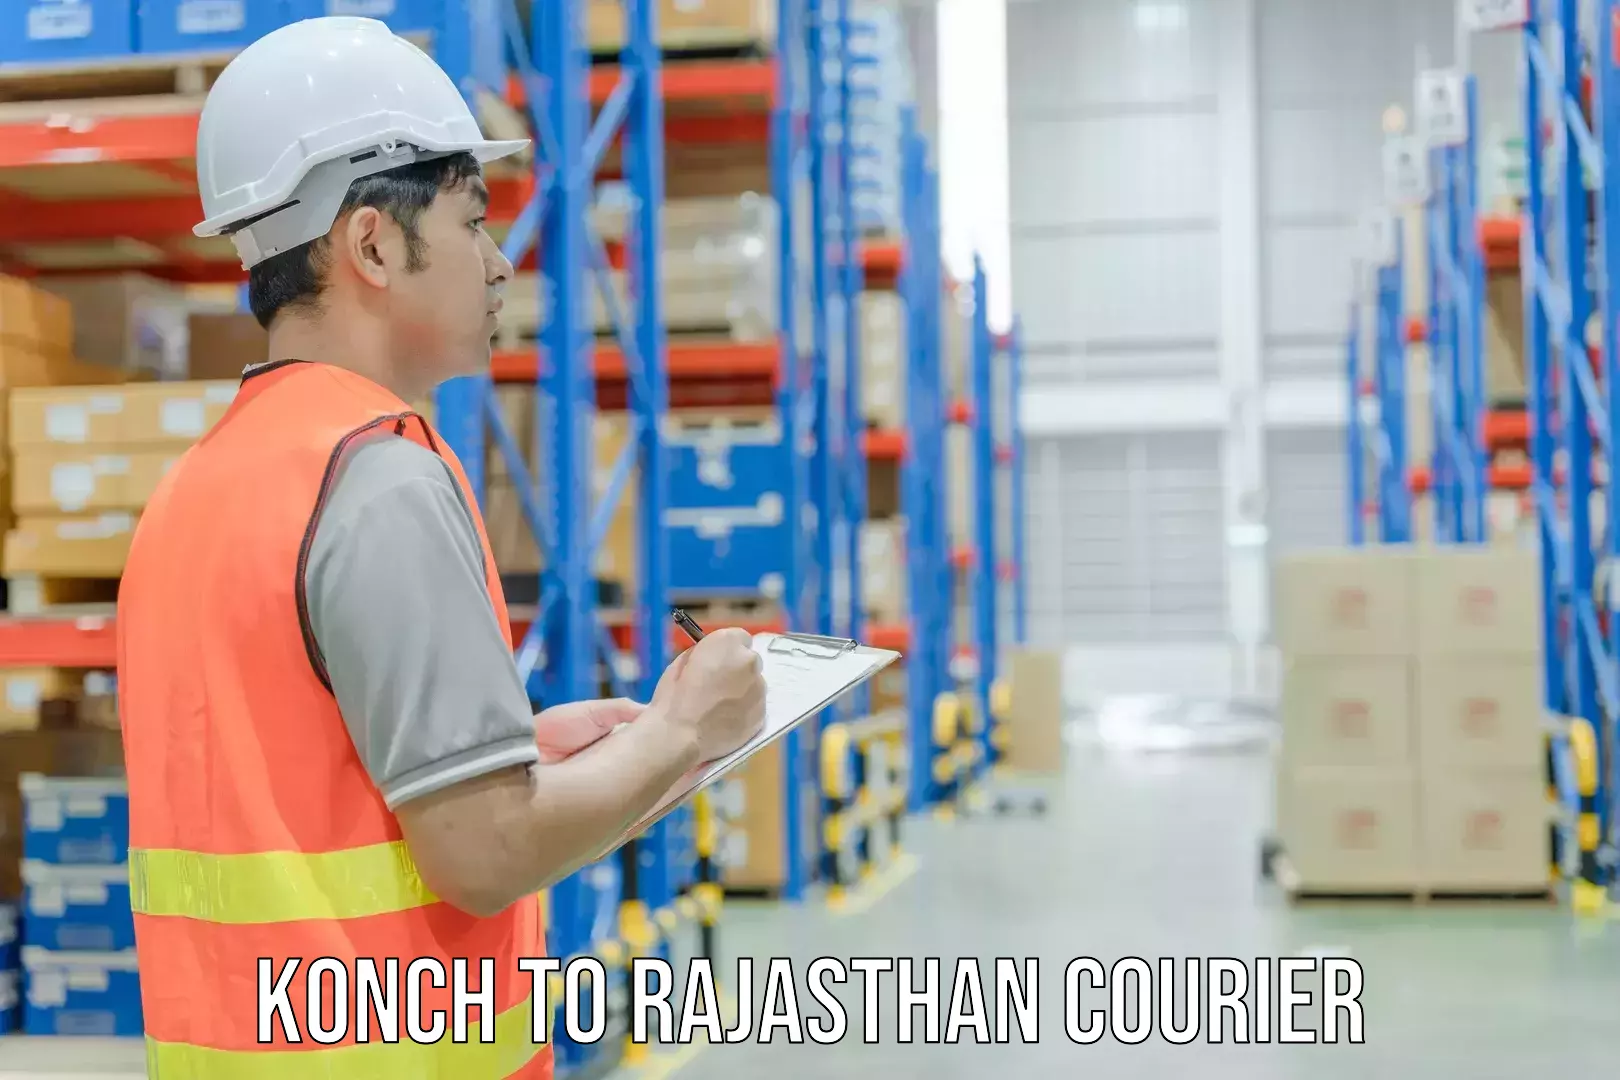 Next-day freight services Konch to Rajasthan